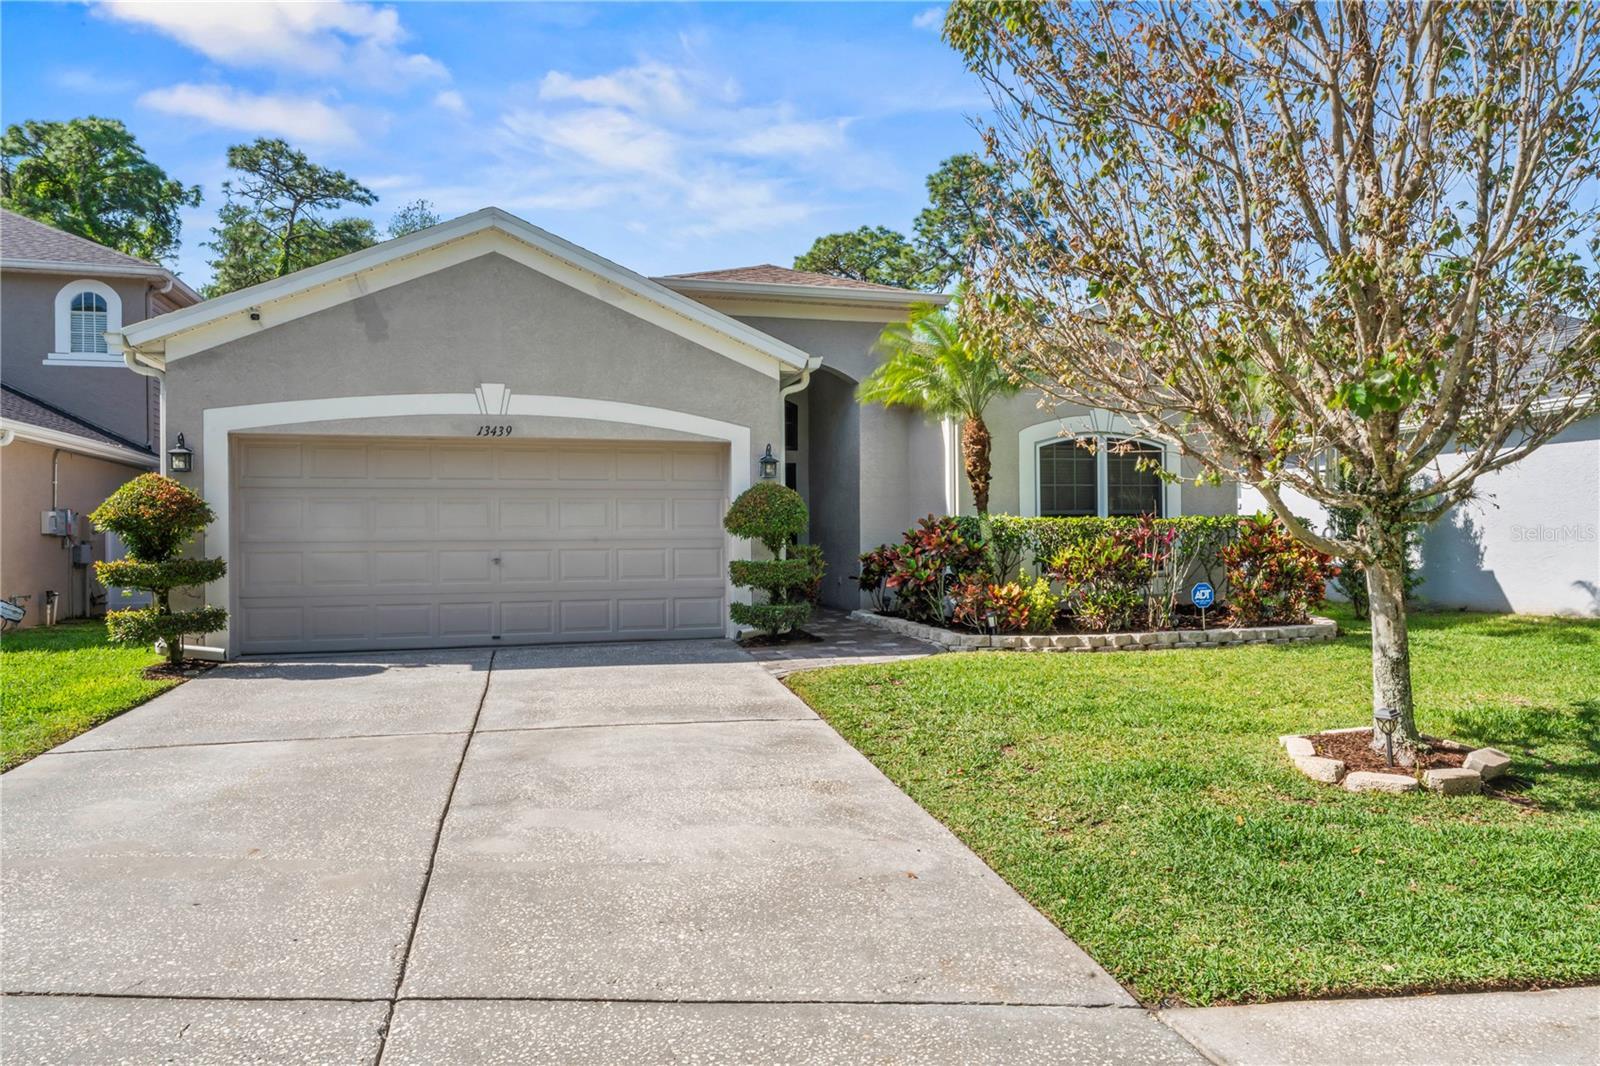 Photo one of 13439 Staghorn Rd Tampa FL 33626 | MLS T3515235